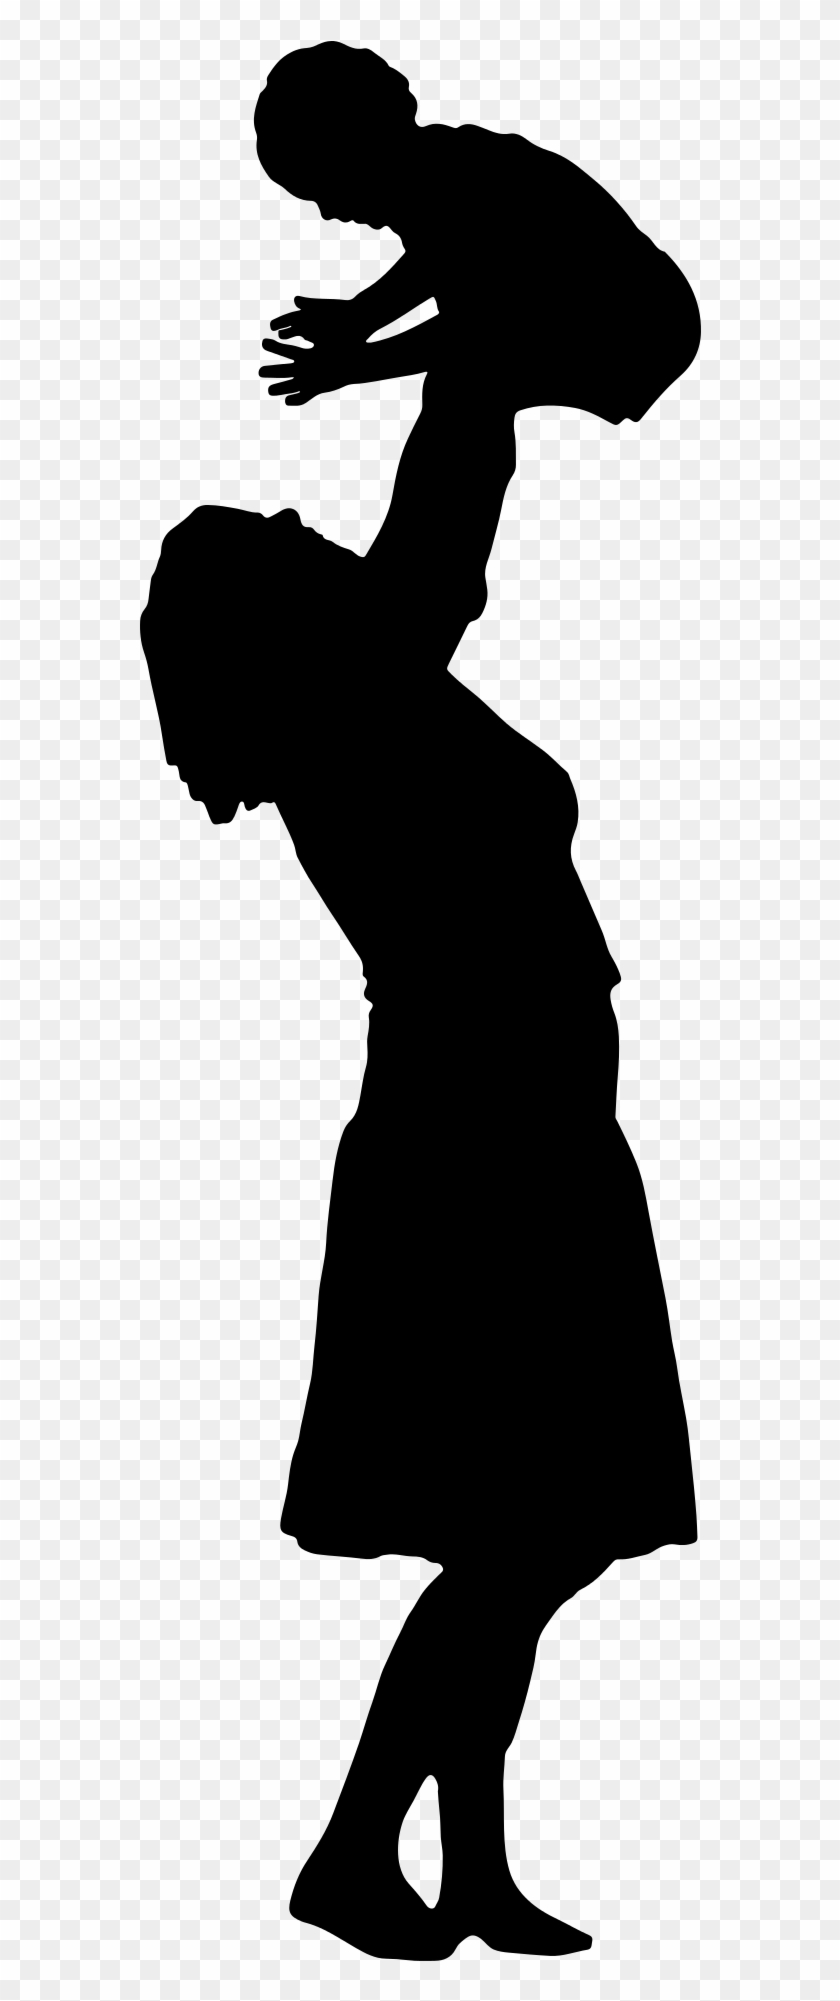 Mother Silhouette Clip Art - Mother And Child Shelloutee #255738